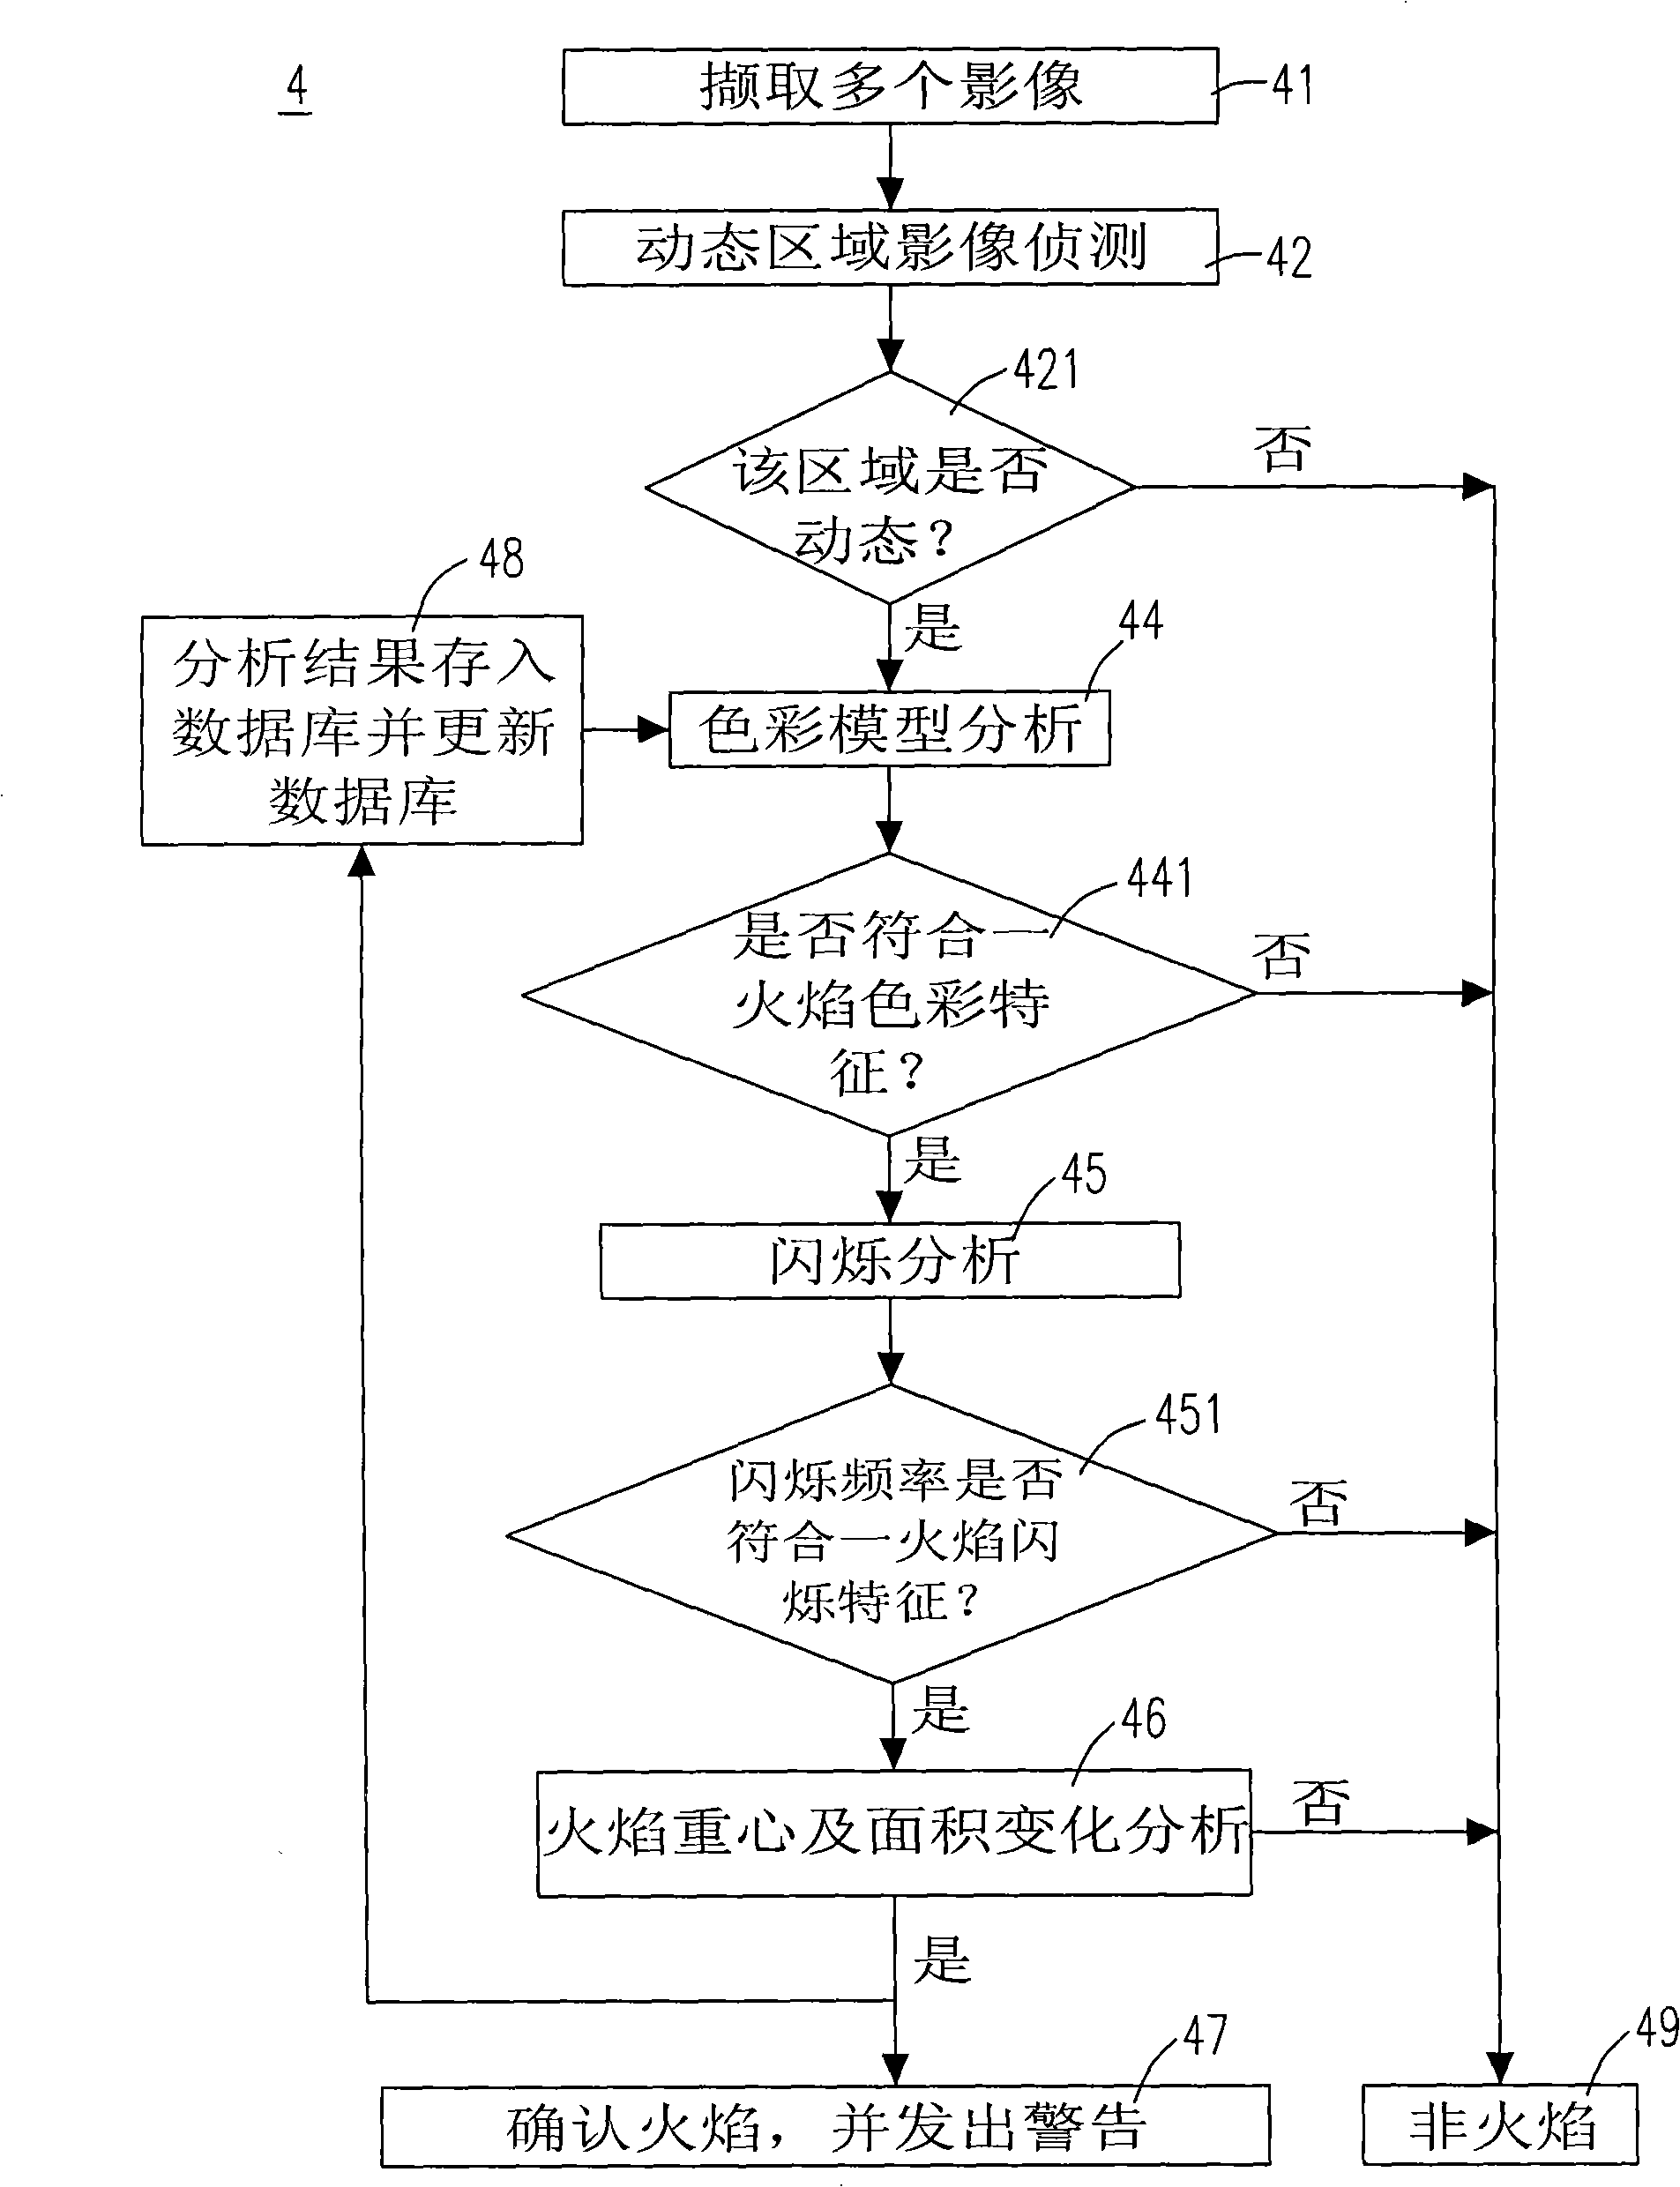 Flame detecting method and device